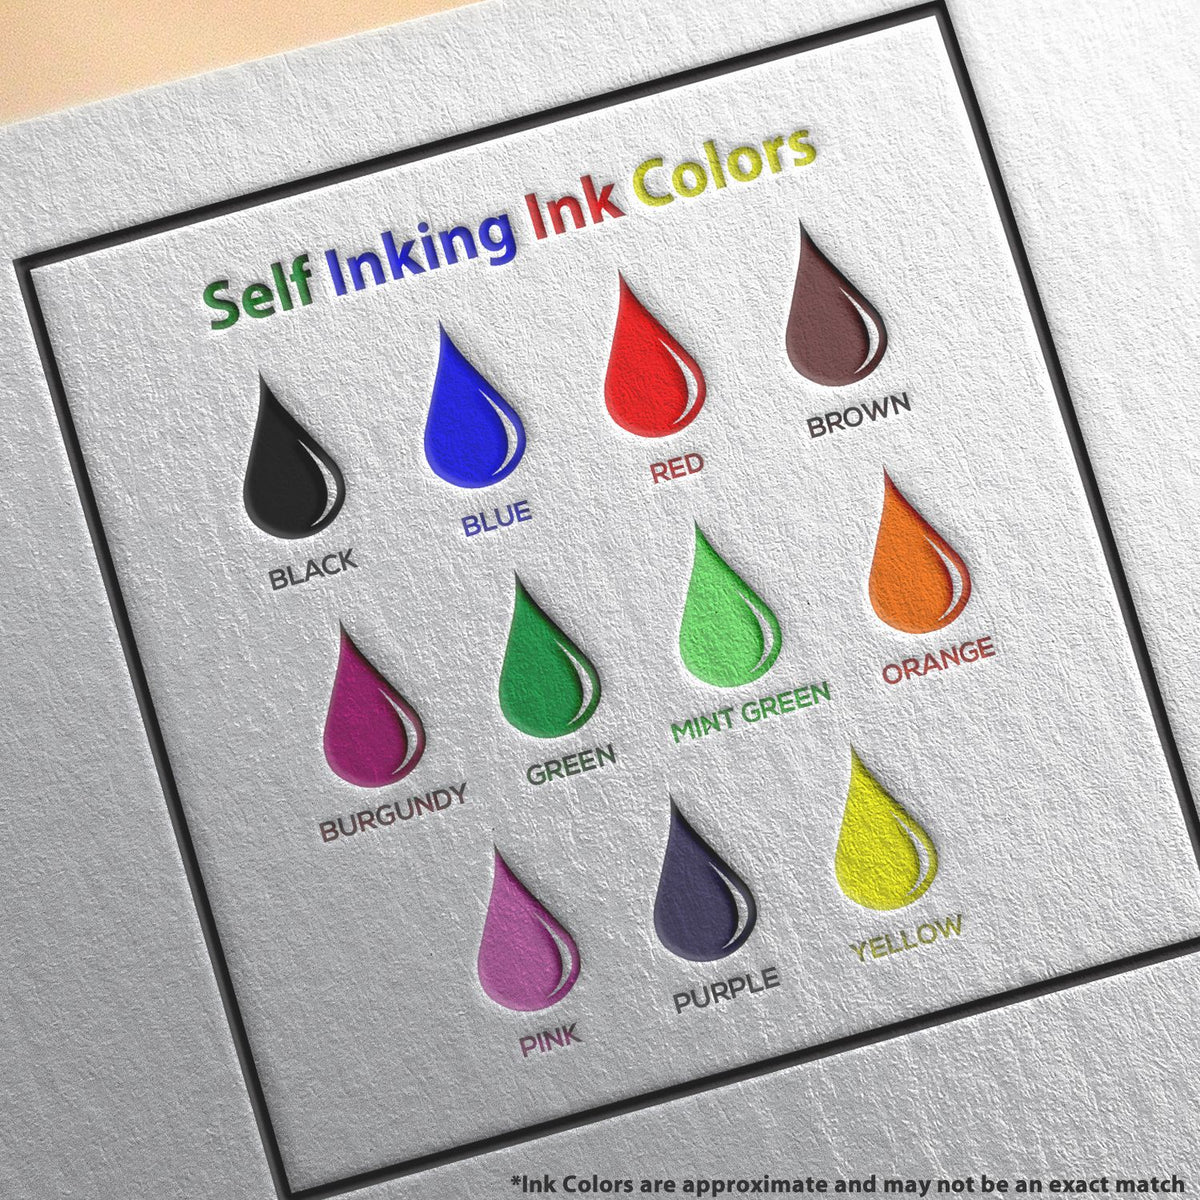 A picture showing the different ink colors or hues available for the Self-Inking California PE Stamp product.